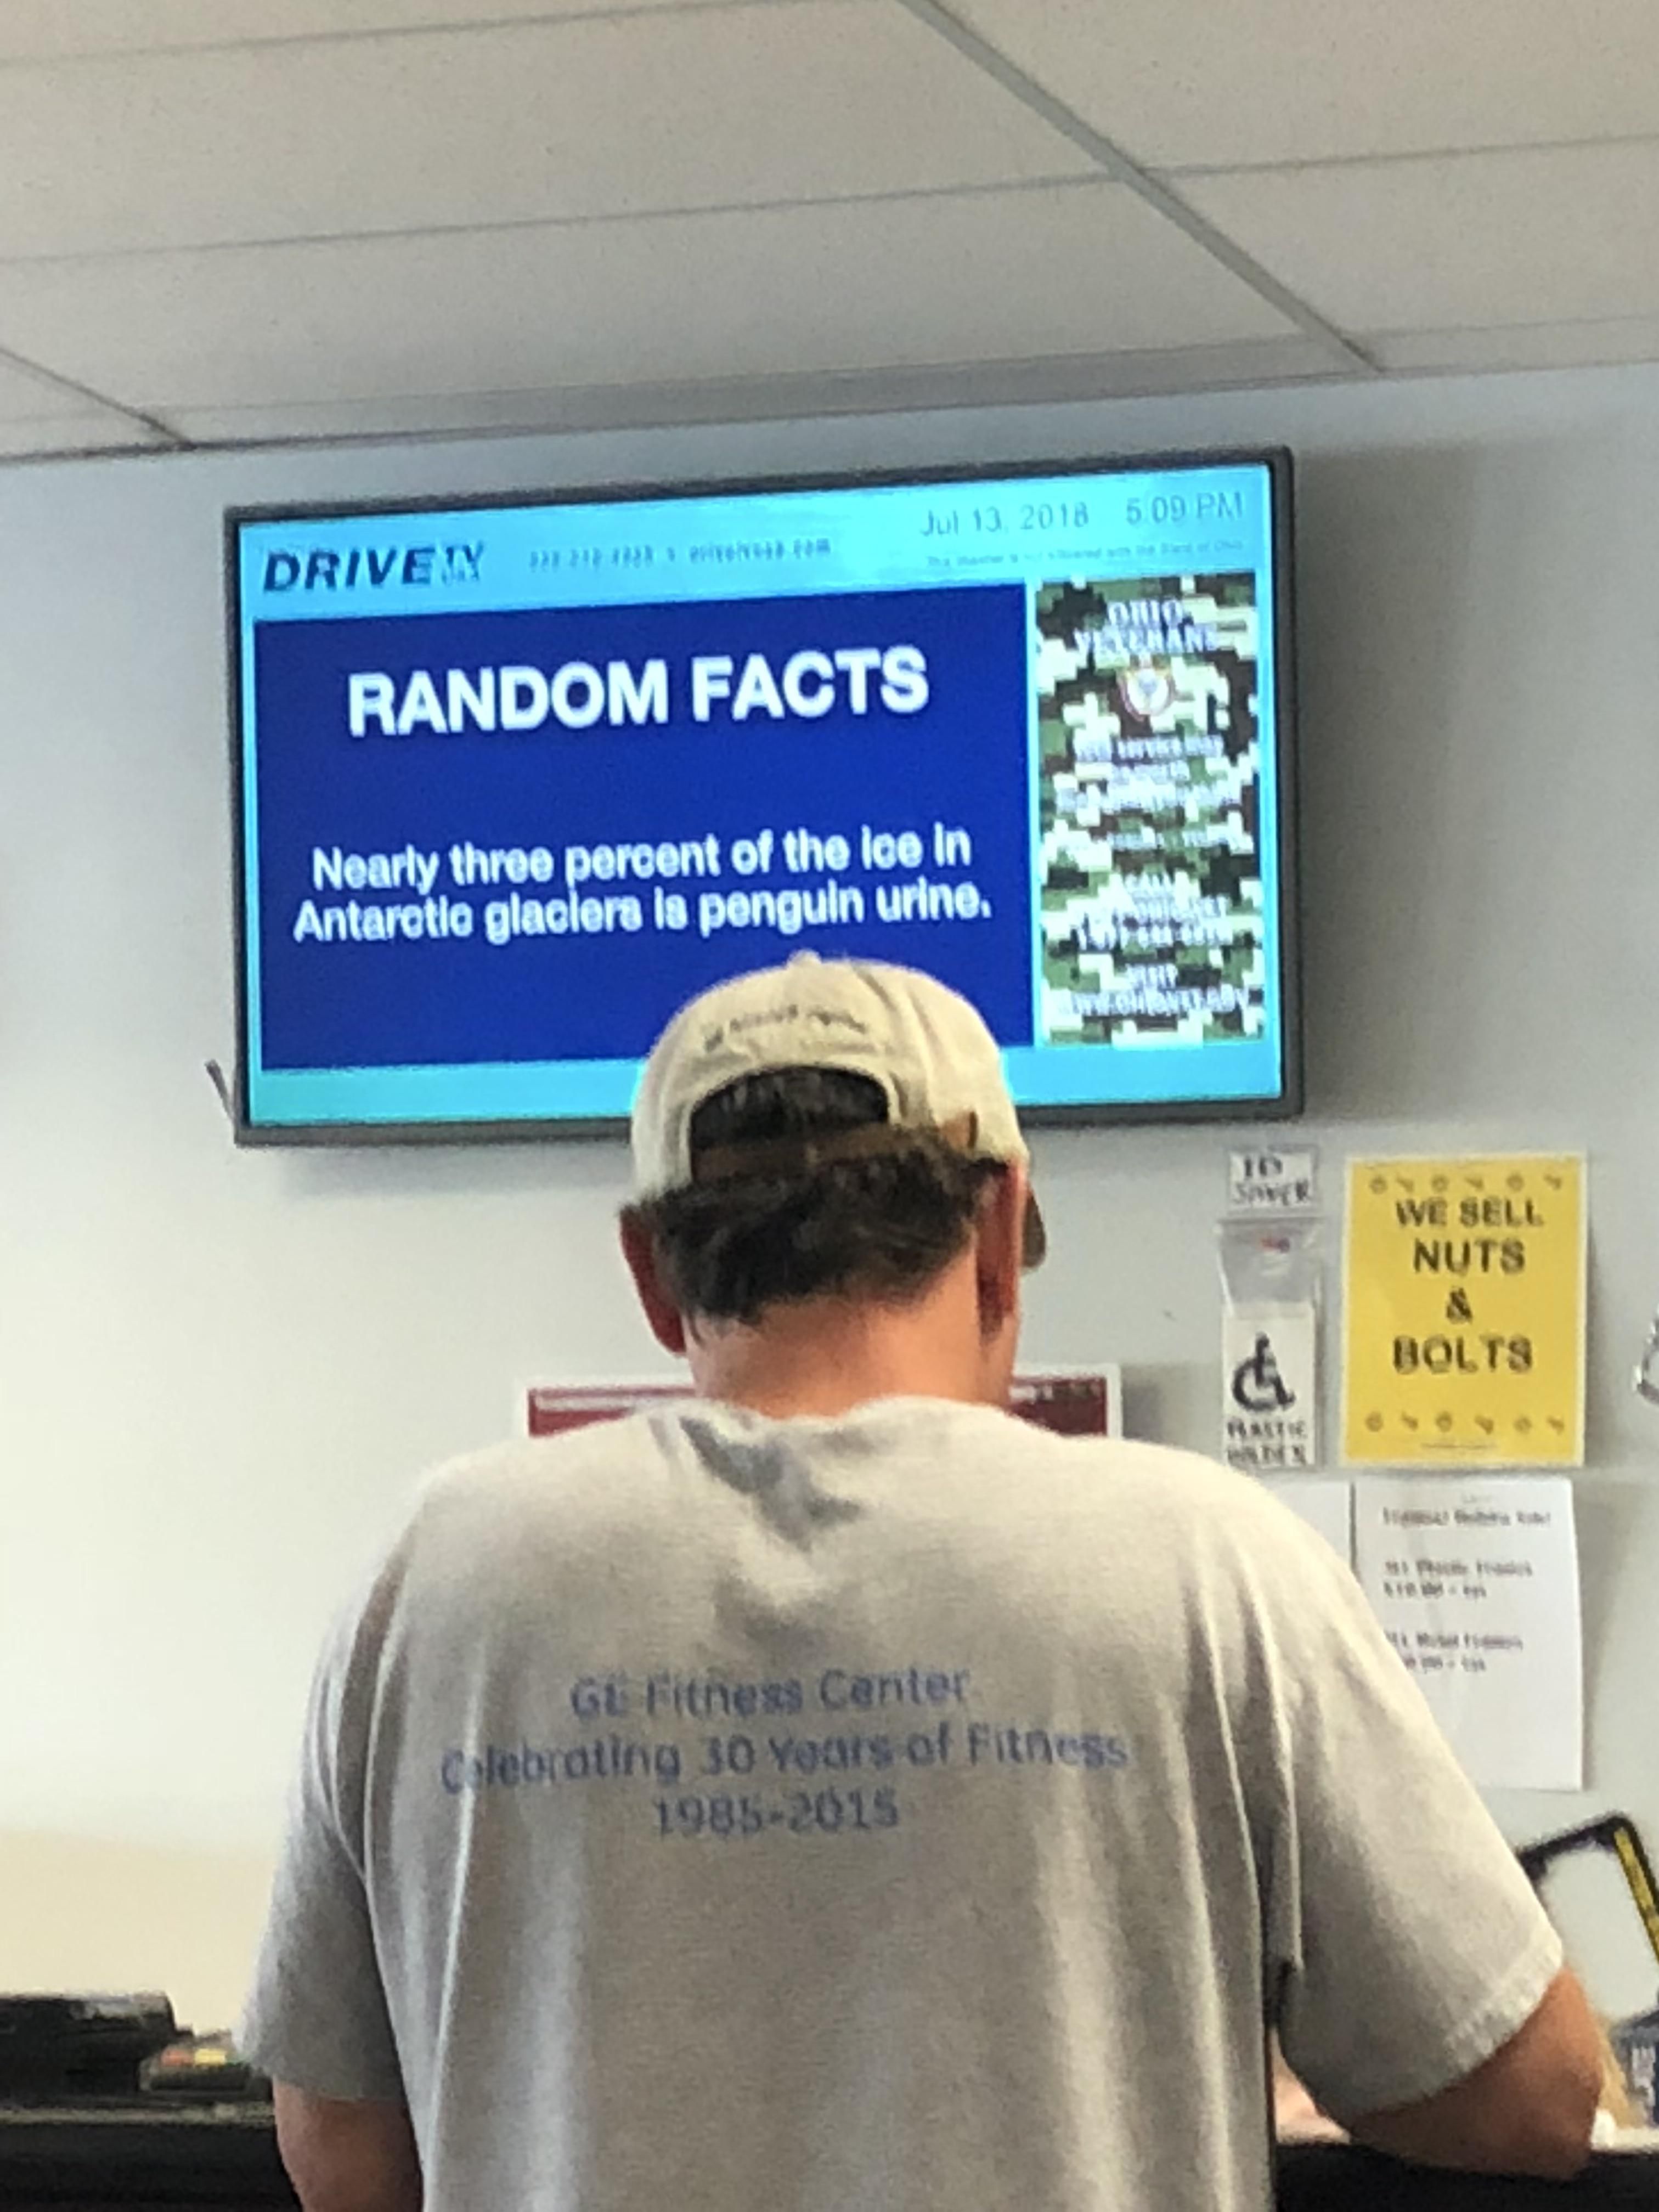 This was on display at the DMV